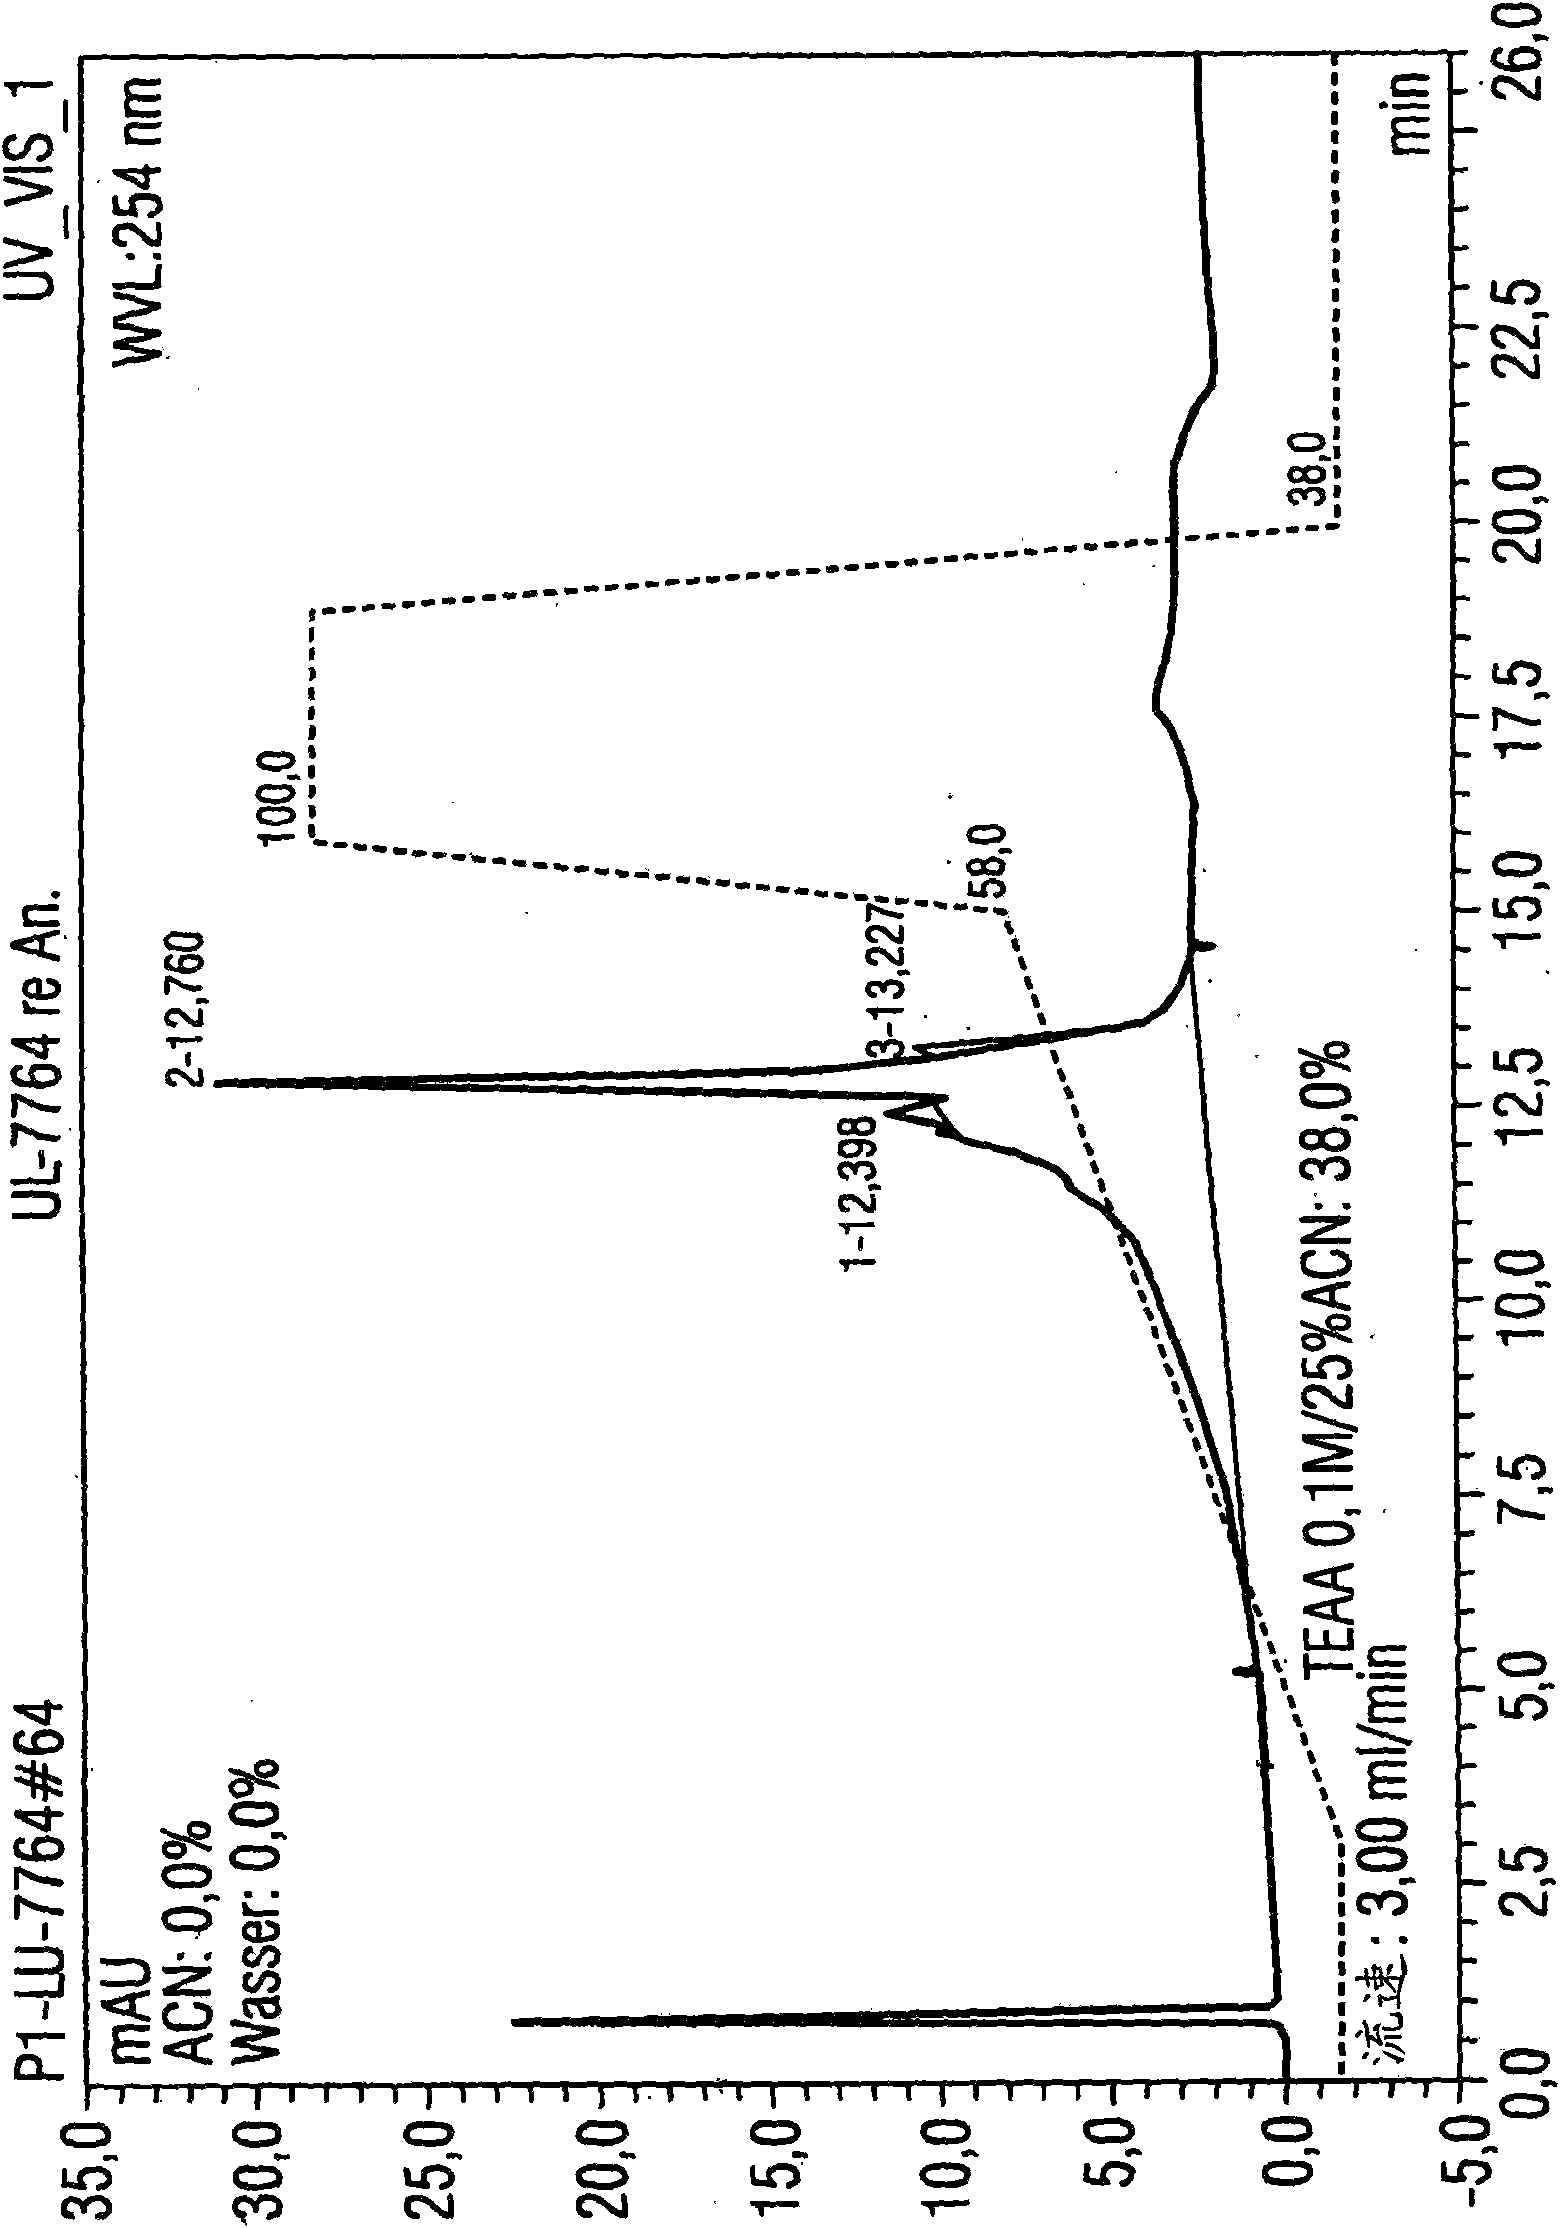 Method for purifying RNA on preparative scale by means of HPLC